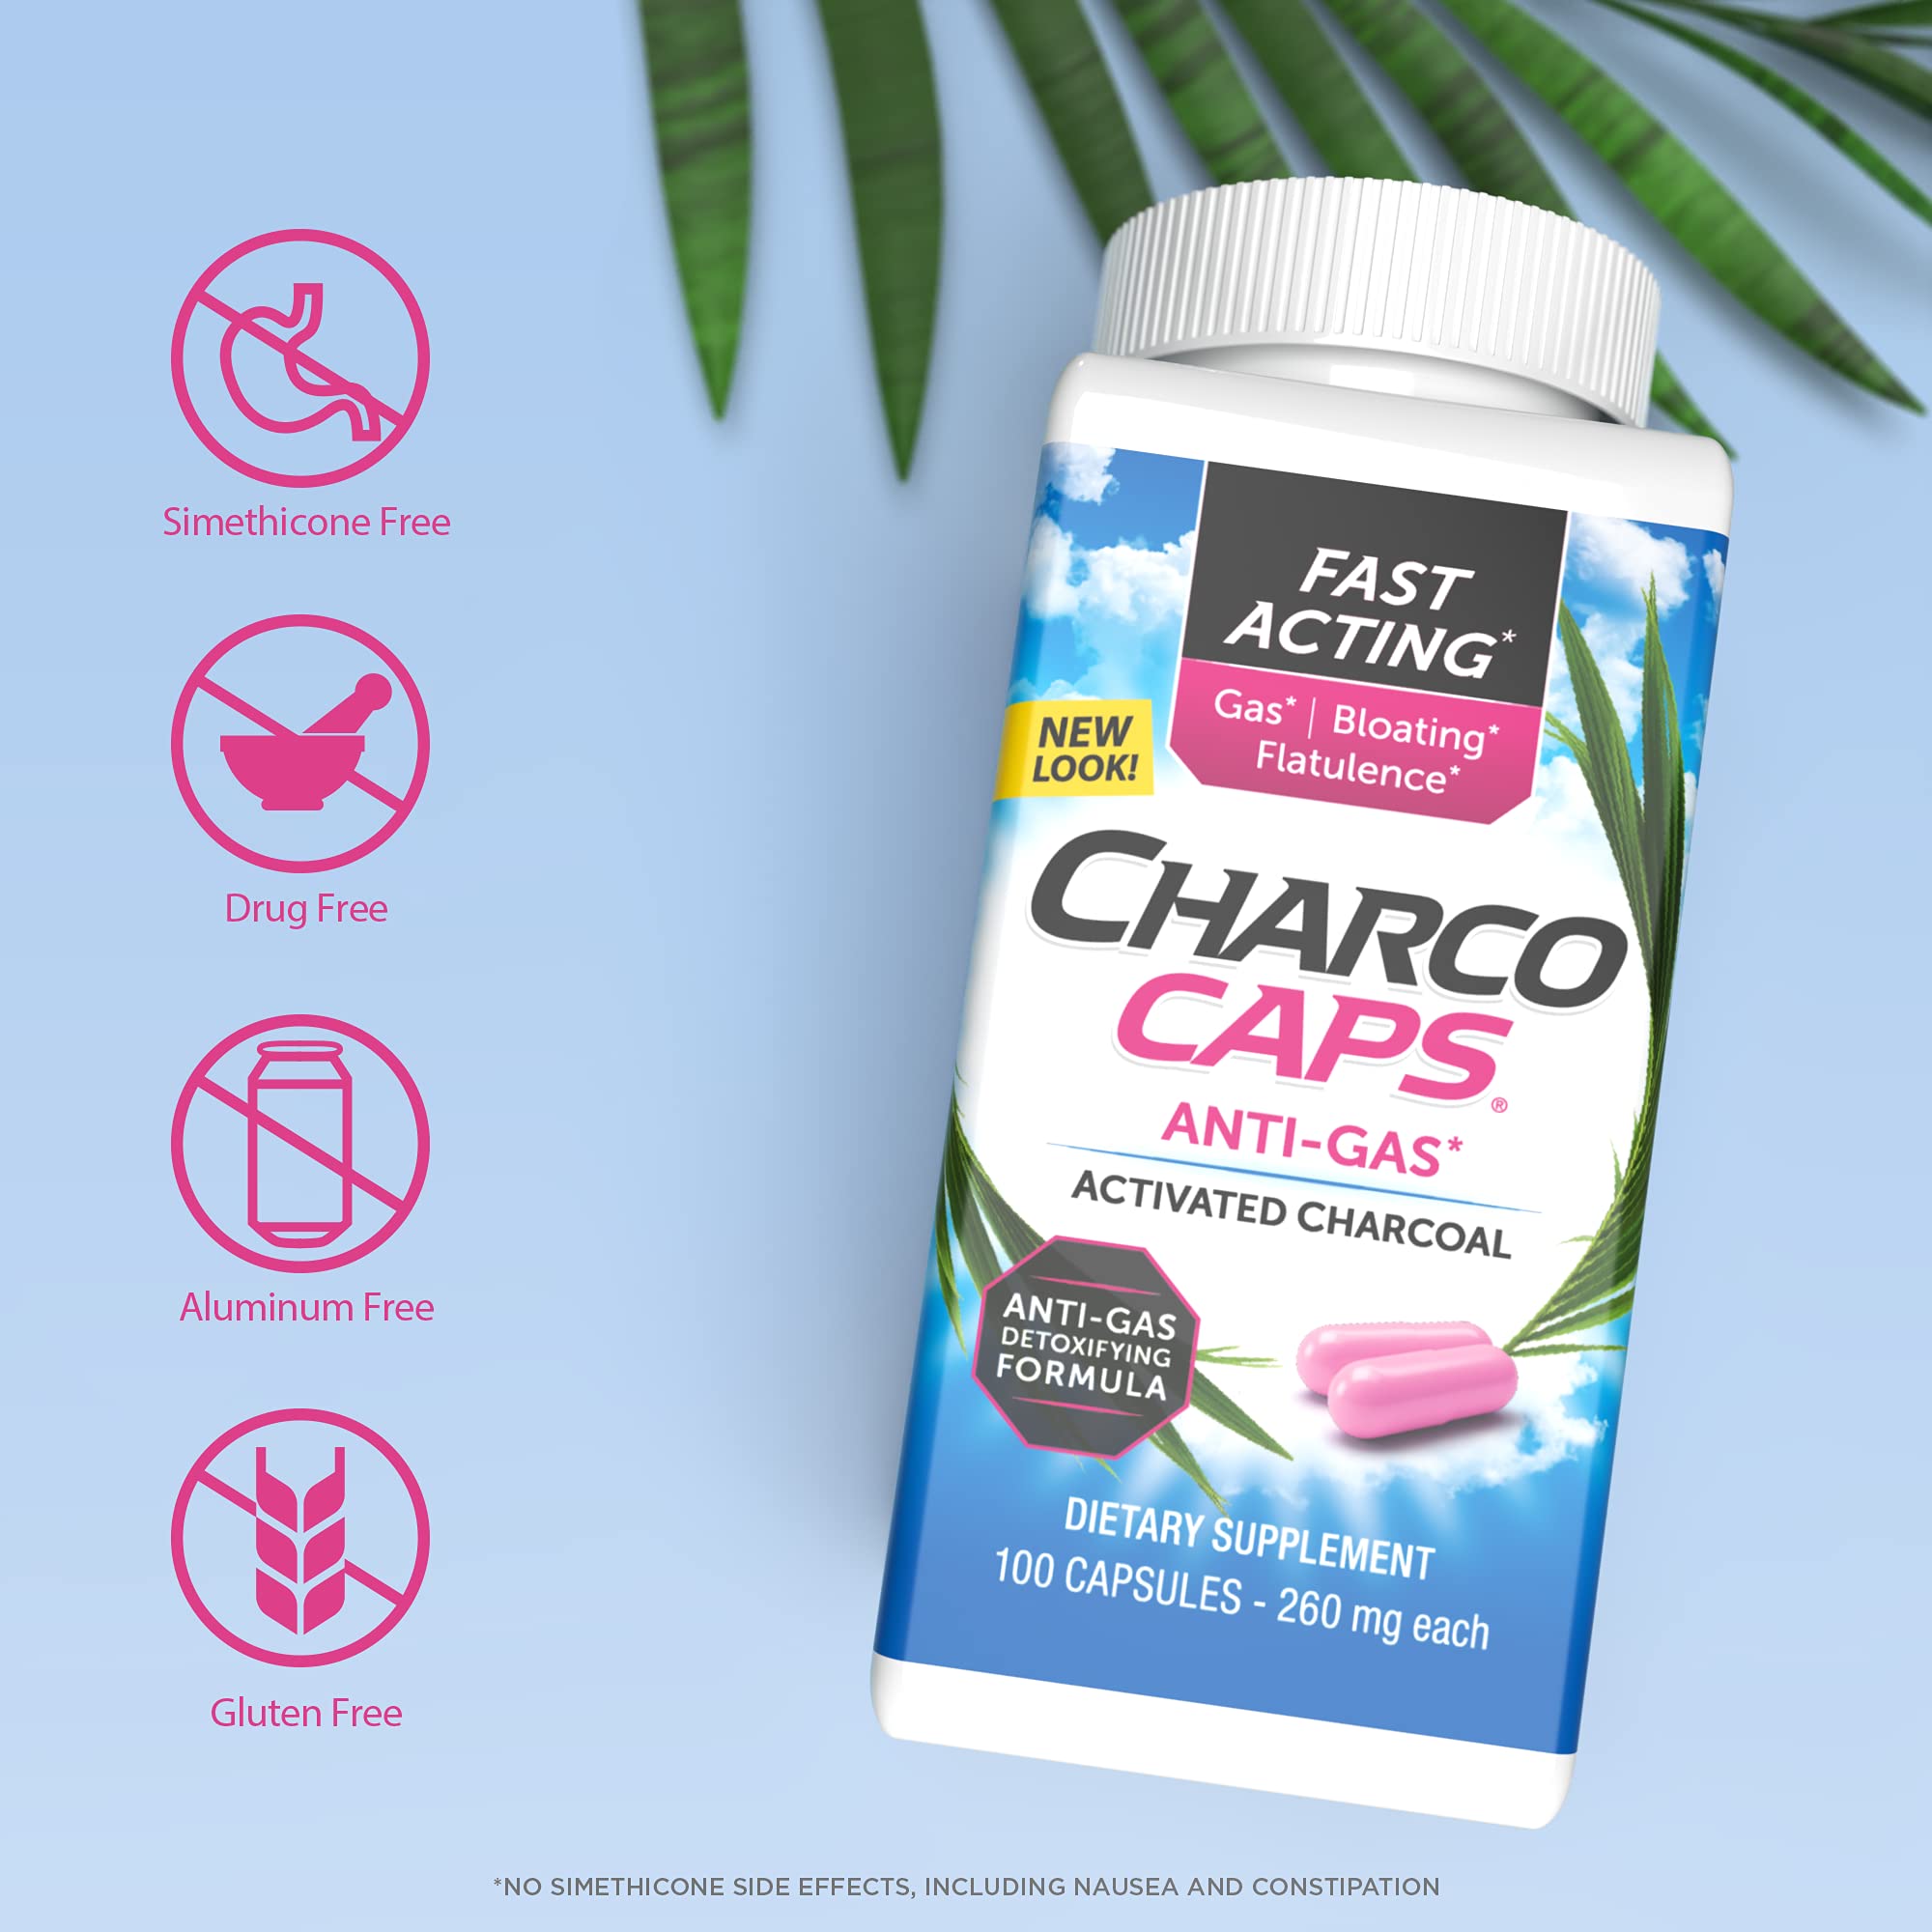 Charcocaps Fast Acting Gas Relief for Bloating & Flatulence, Drug Free Detoxifying Activated Charcoal Formula, 100 Capsules, 30 Day Supply, Pink